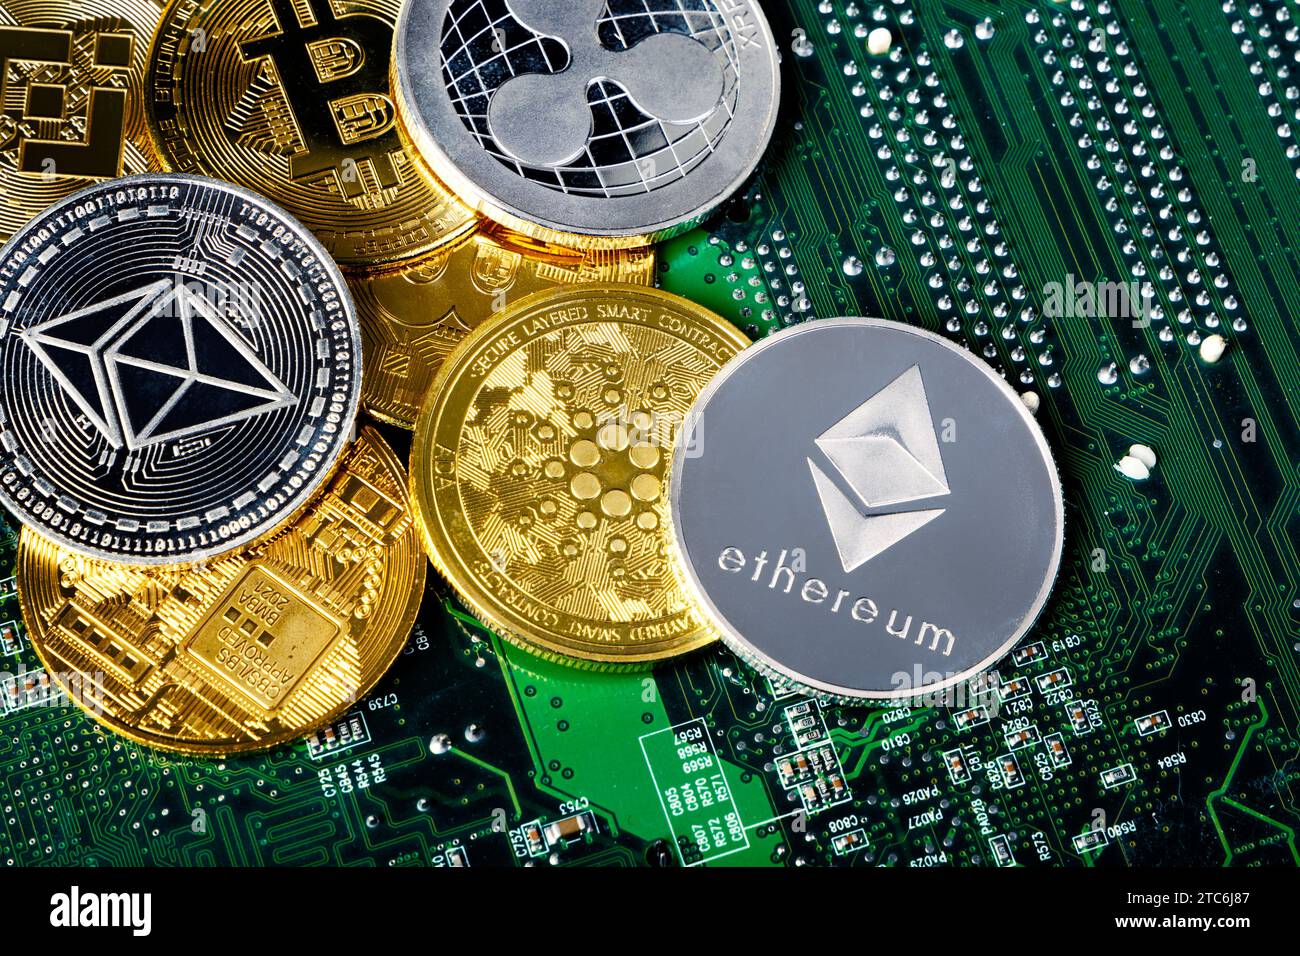 Selection of cryptocurrency token coins with a circuit board background Stock Photo